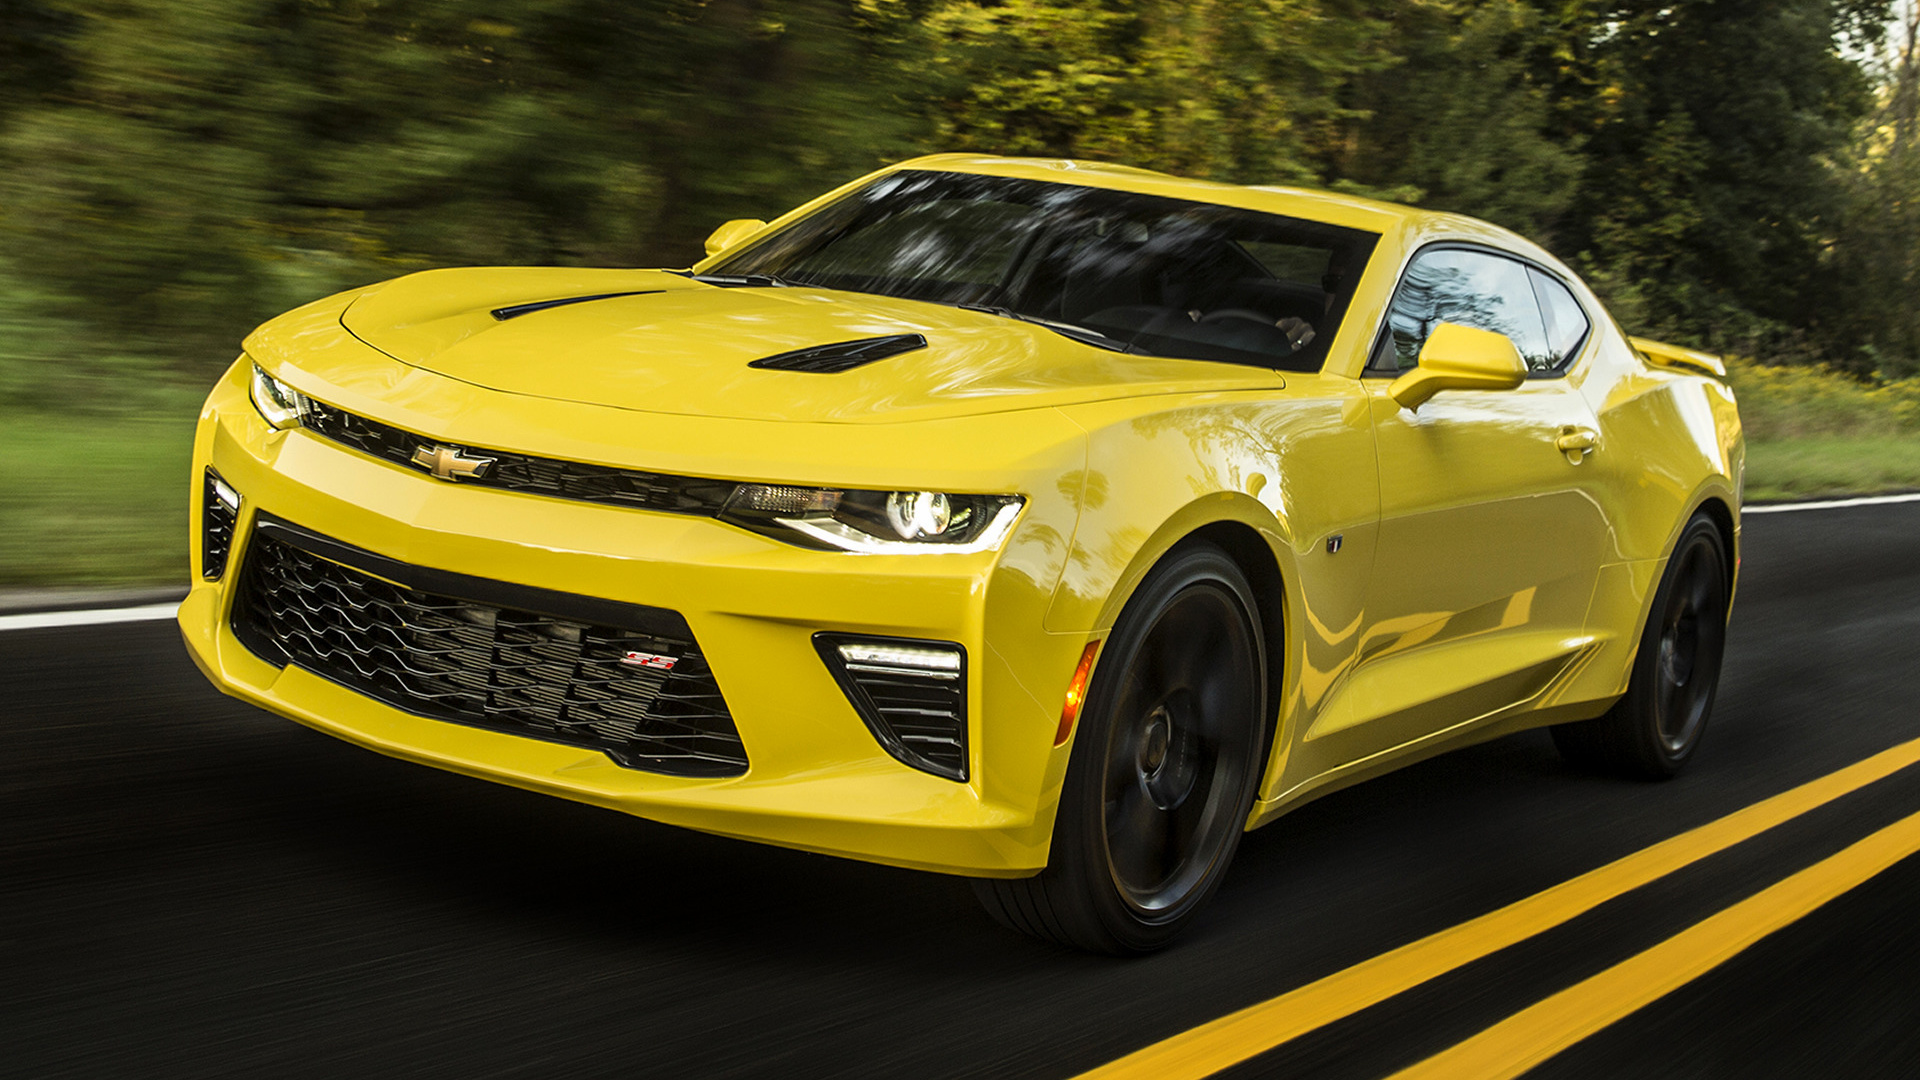 Chevrolet Camaro SS 2016 Wallpapers and HD Images